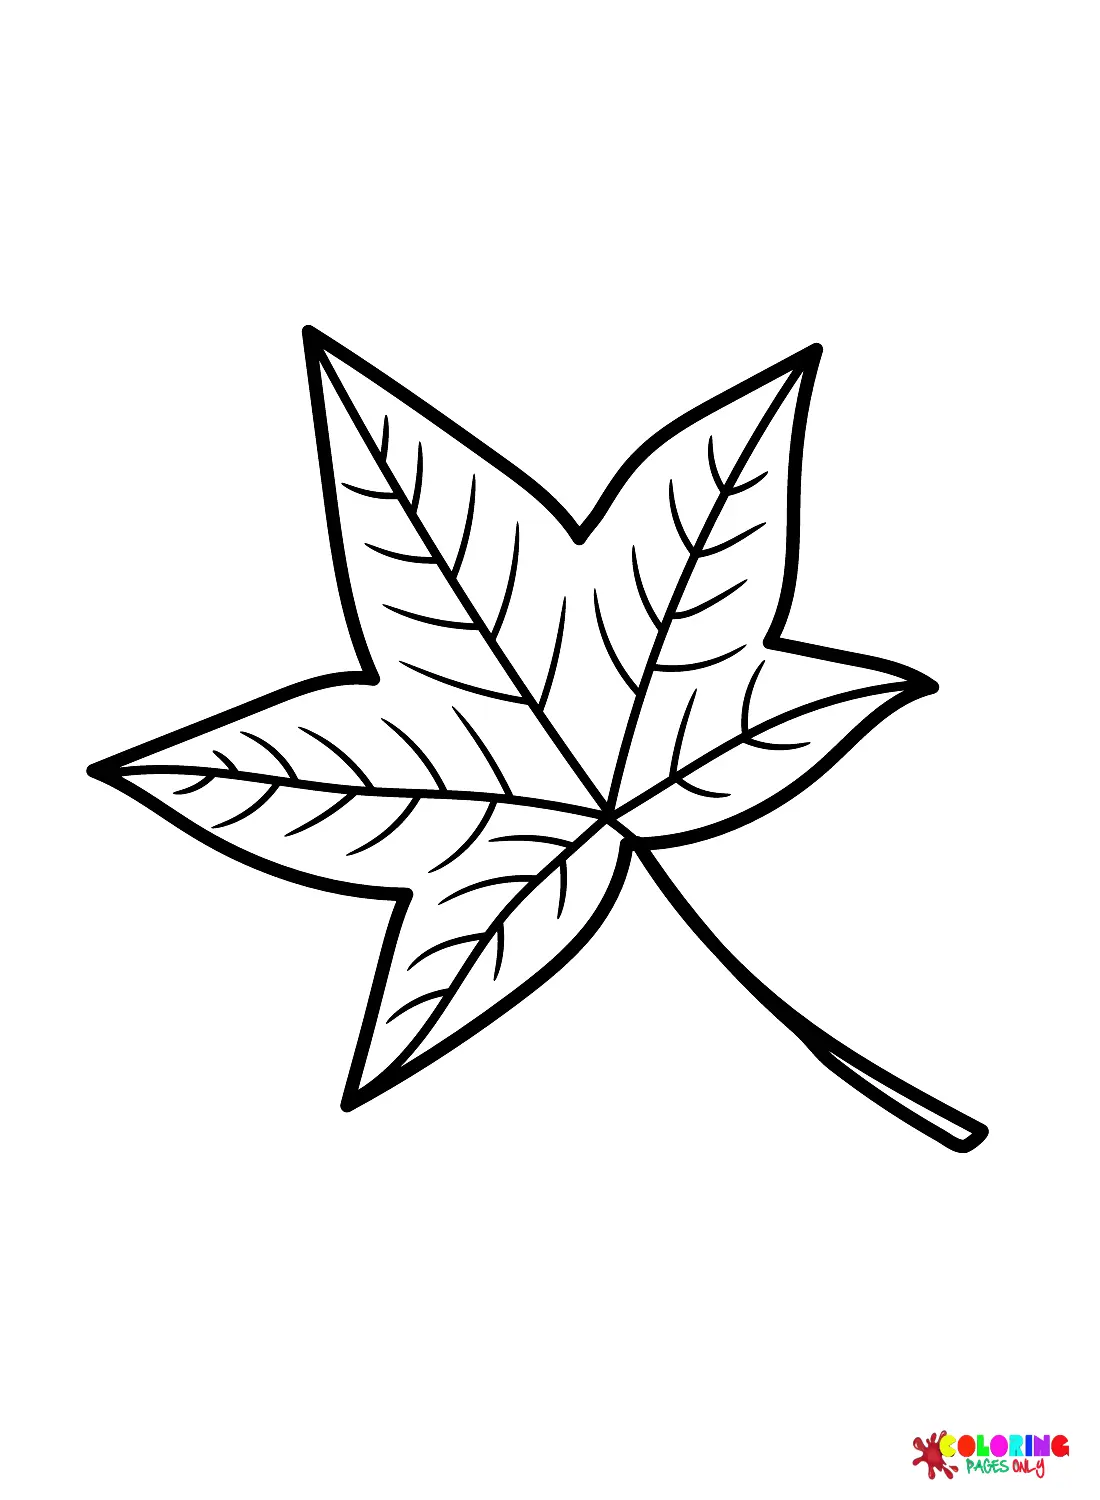 Leaves Coloring Pages